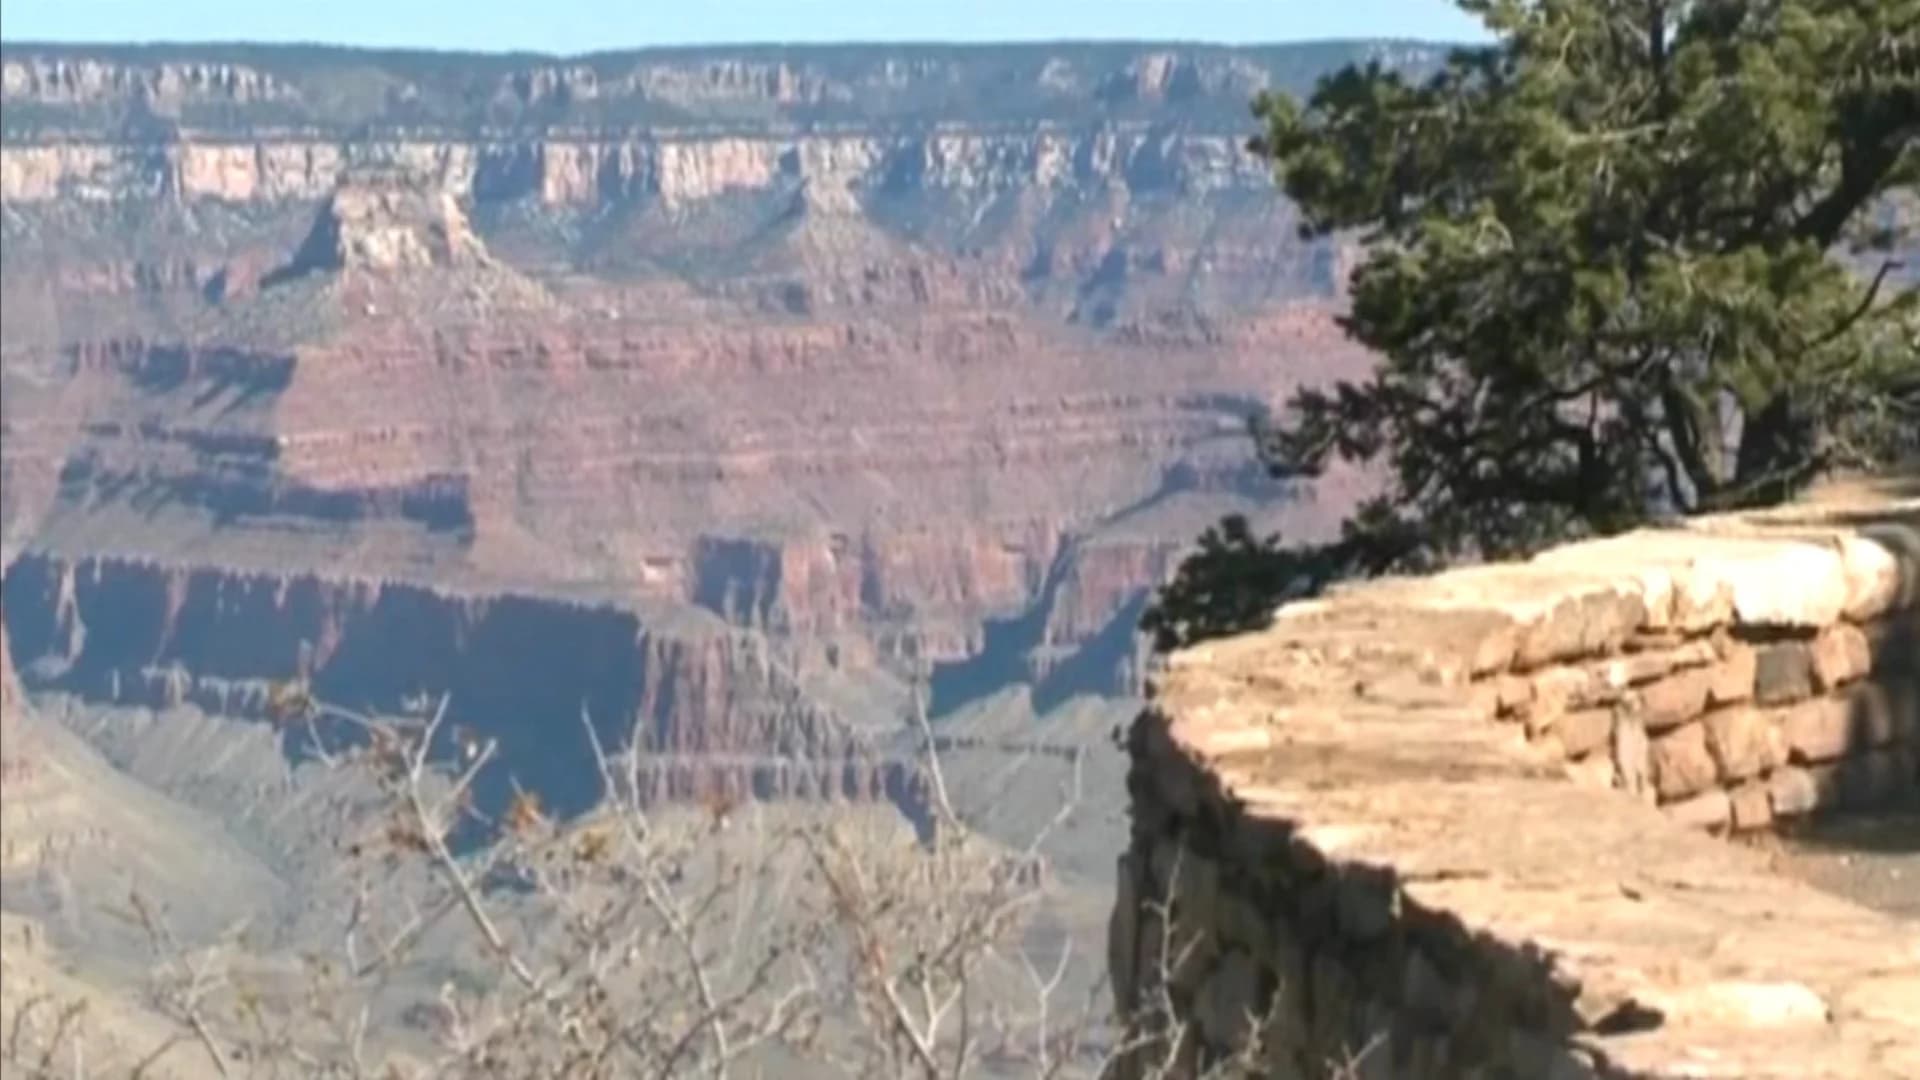 Tourist taking photos at Grand Canyon dies following fall --- 2nd death this week